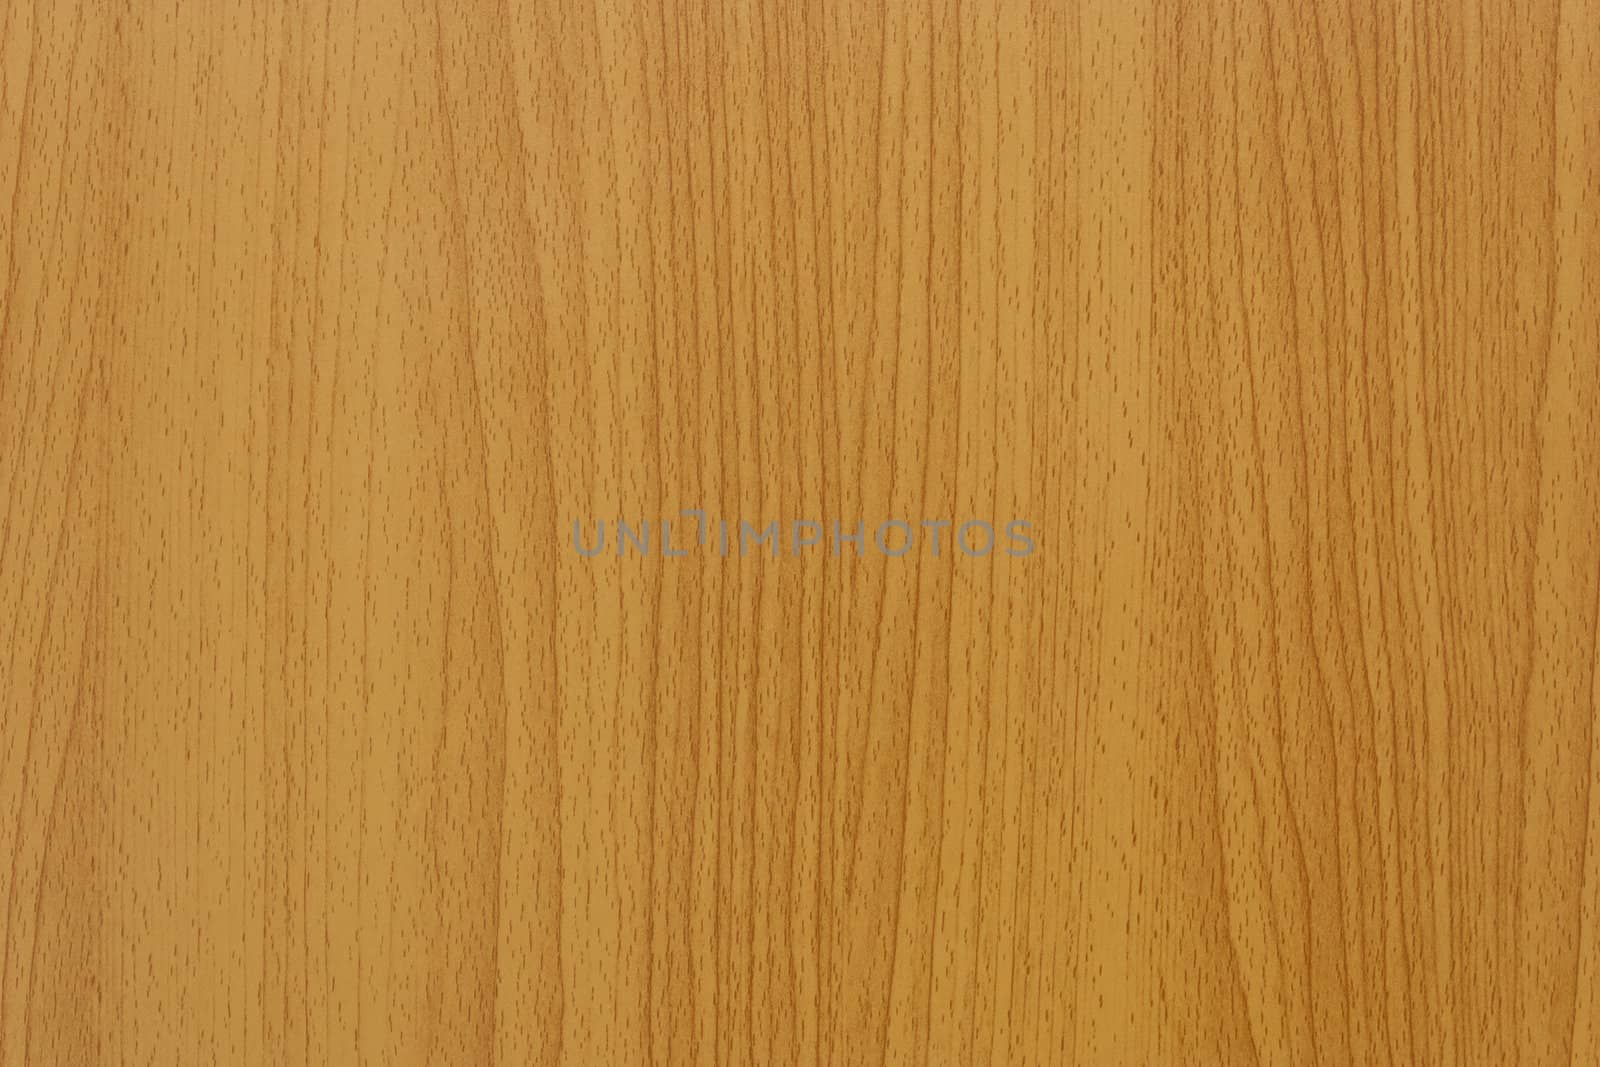 Teak wood commonly used in home decoration or shops to make them look nice and clean.